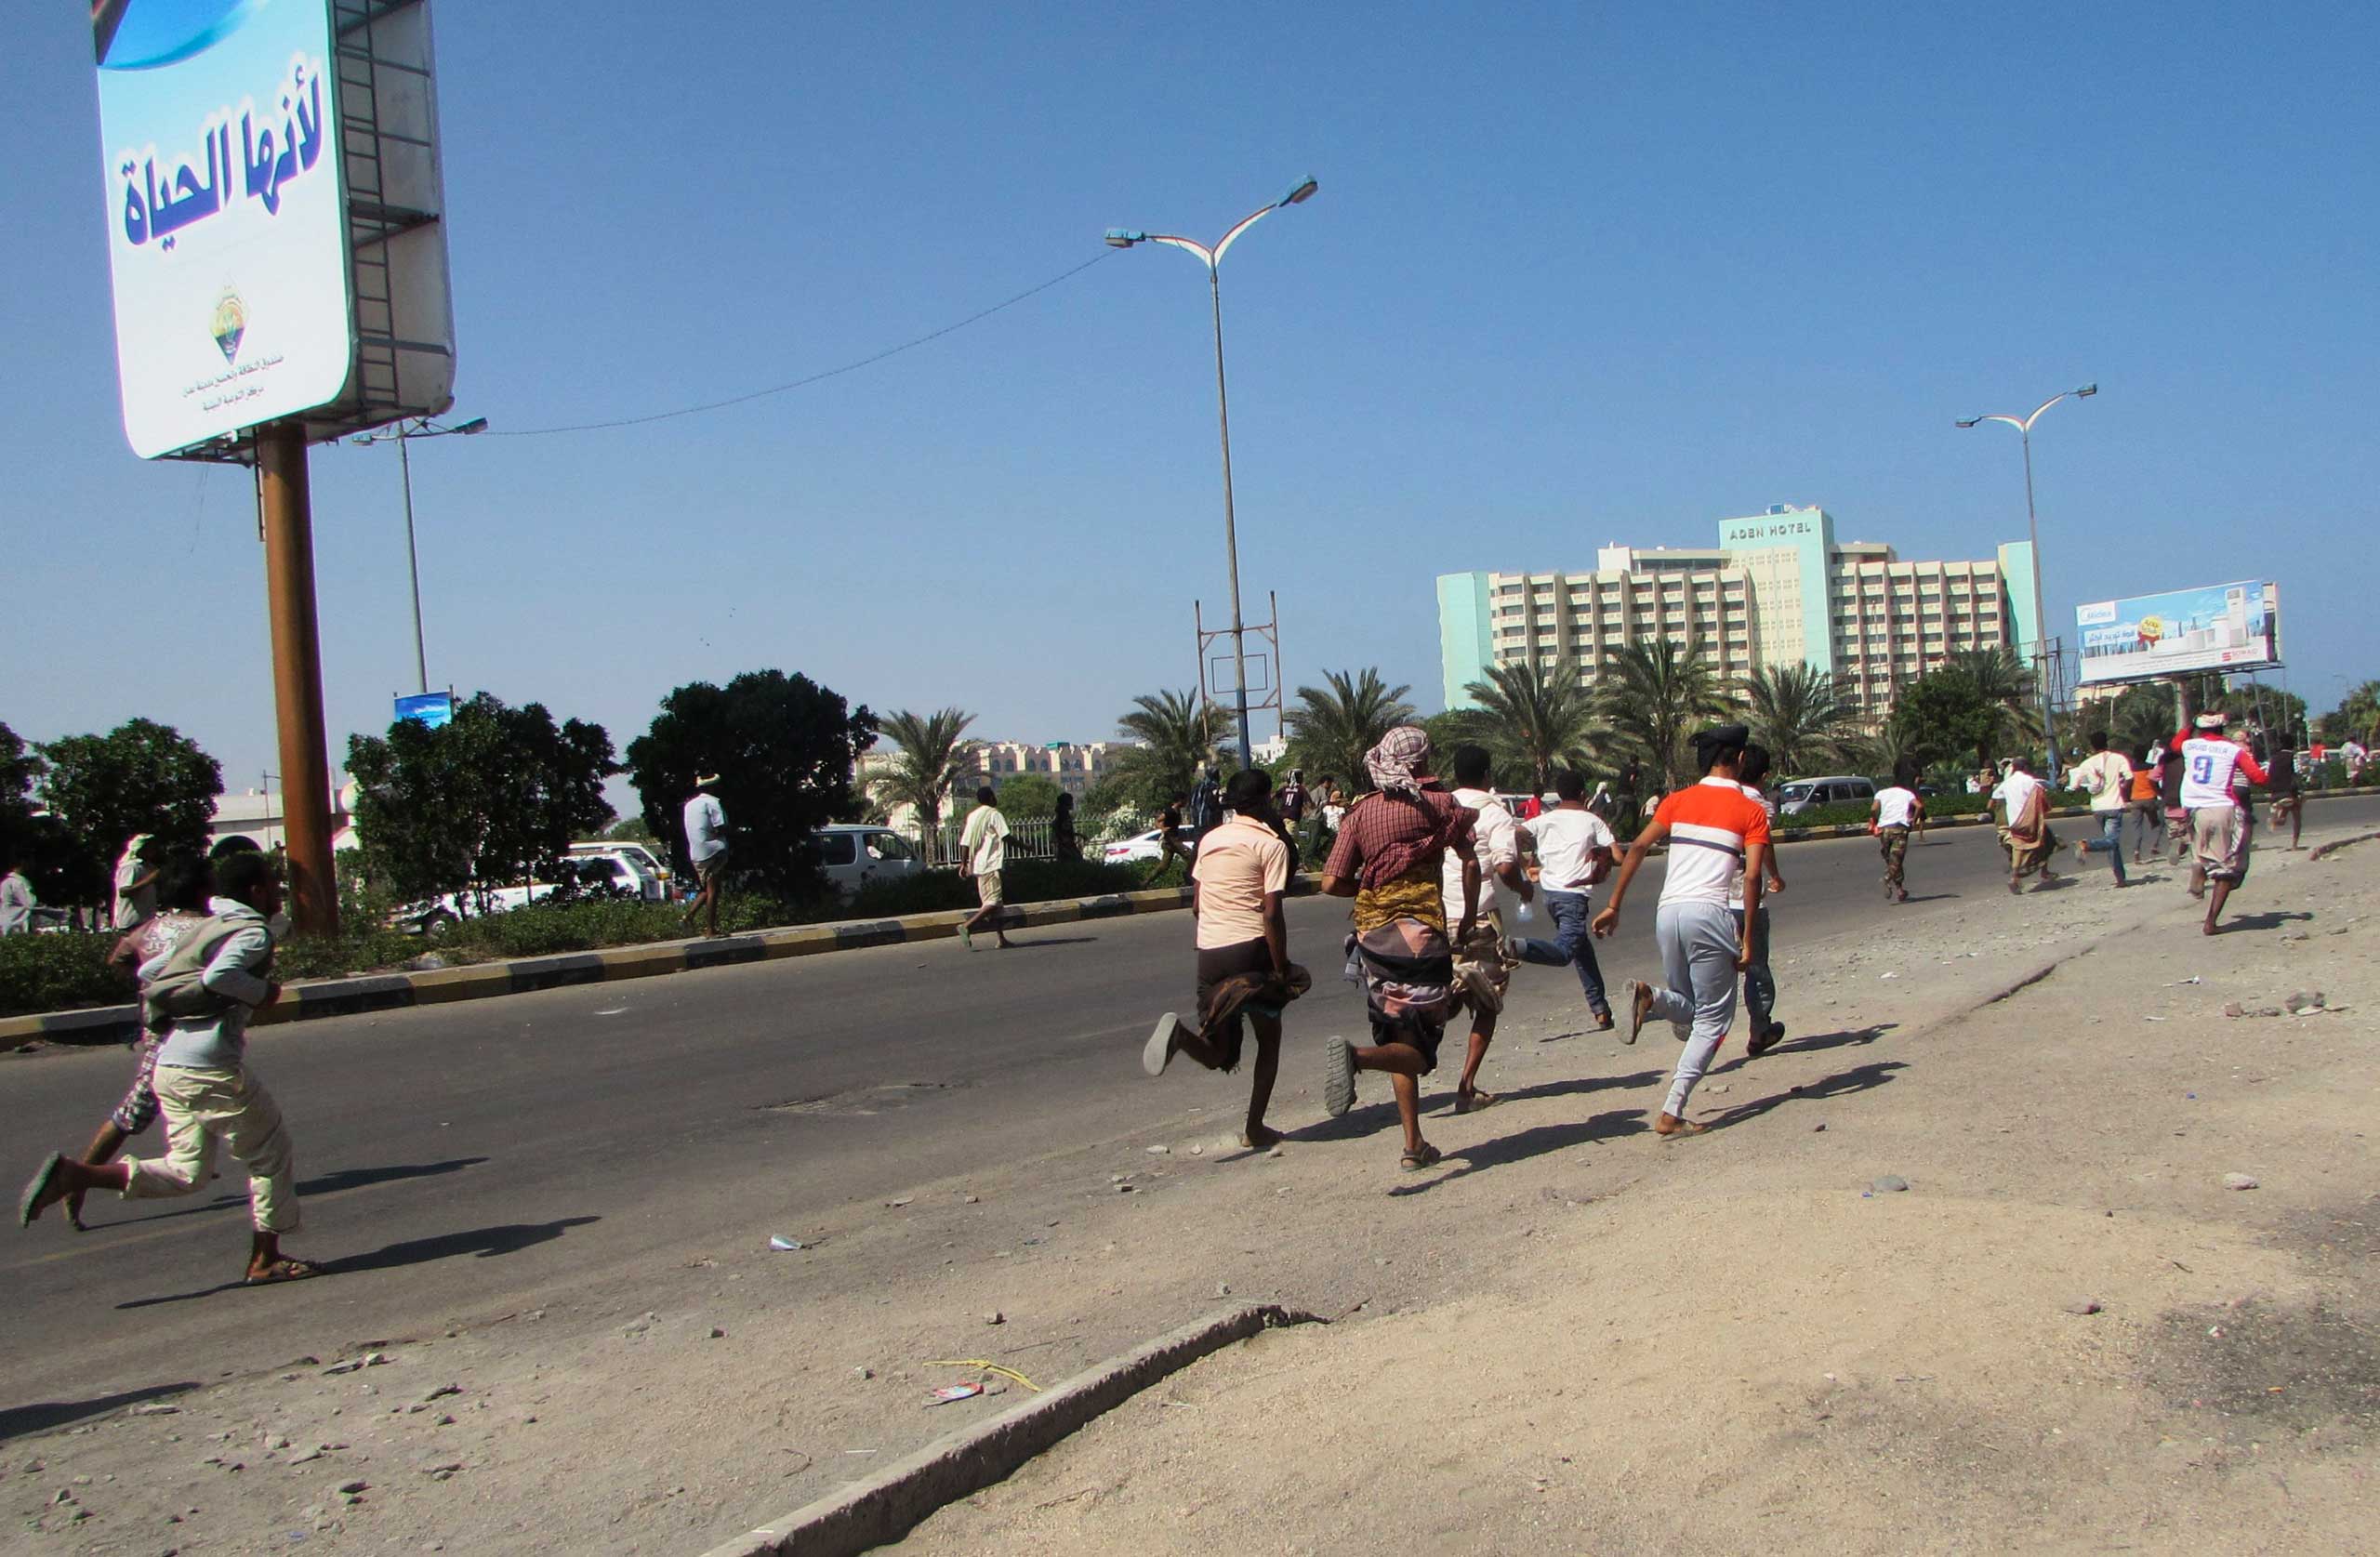 People flee after a gunfire on a street in the southern port city of Aden, Yemen, on March 25, 2015.